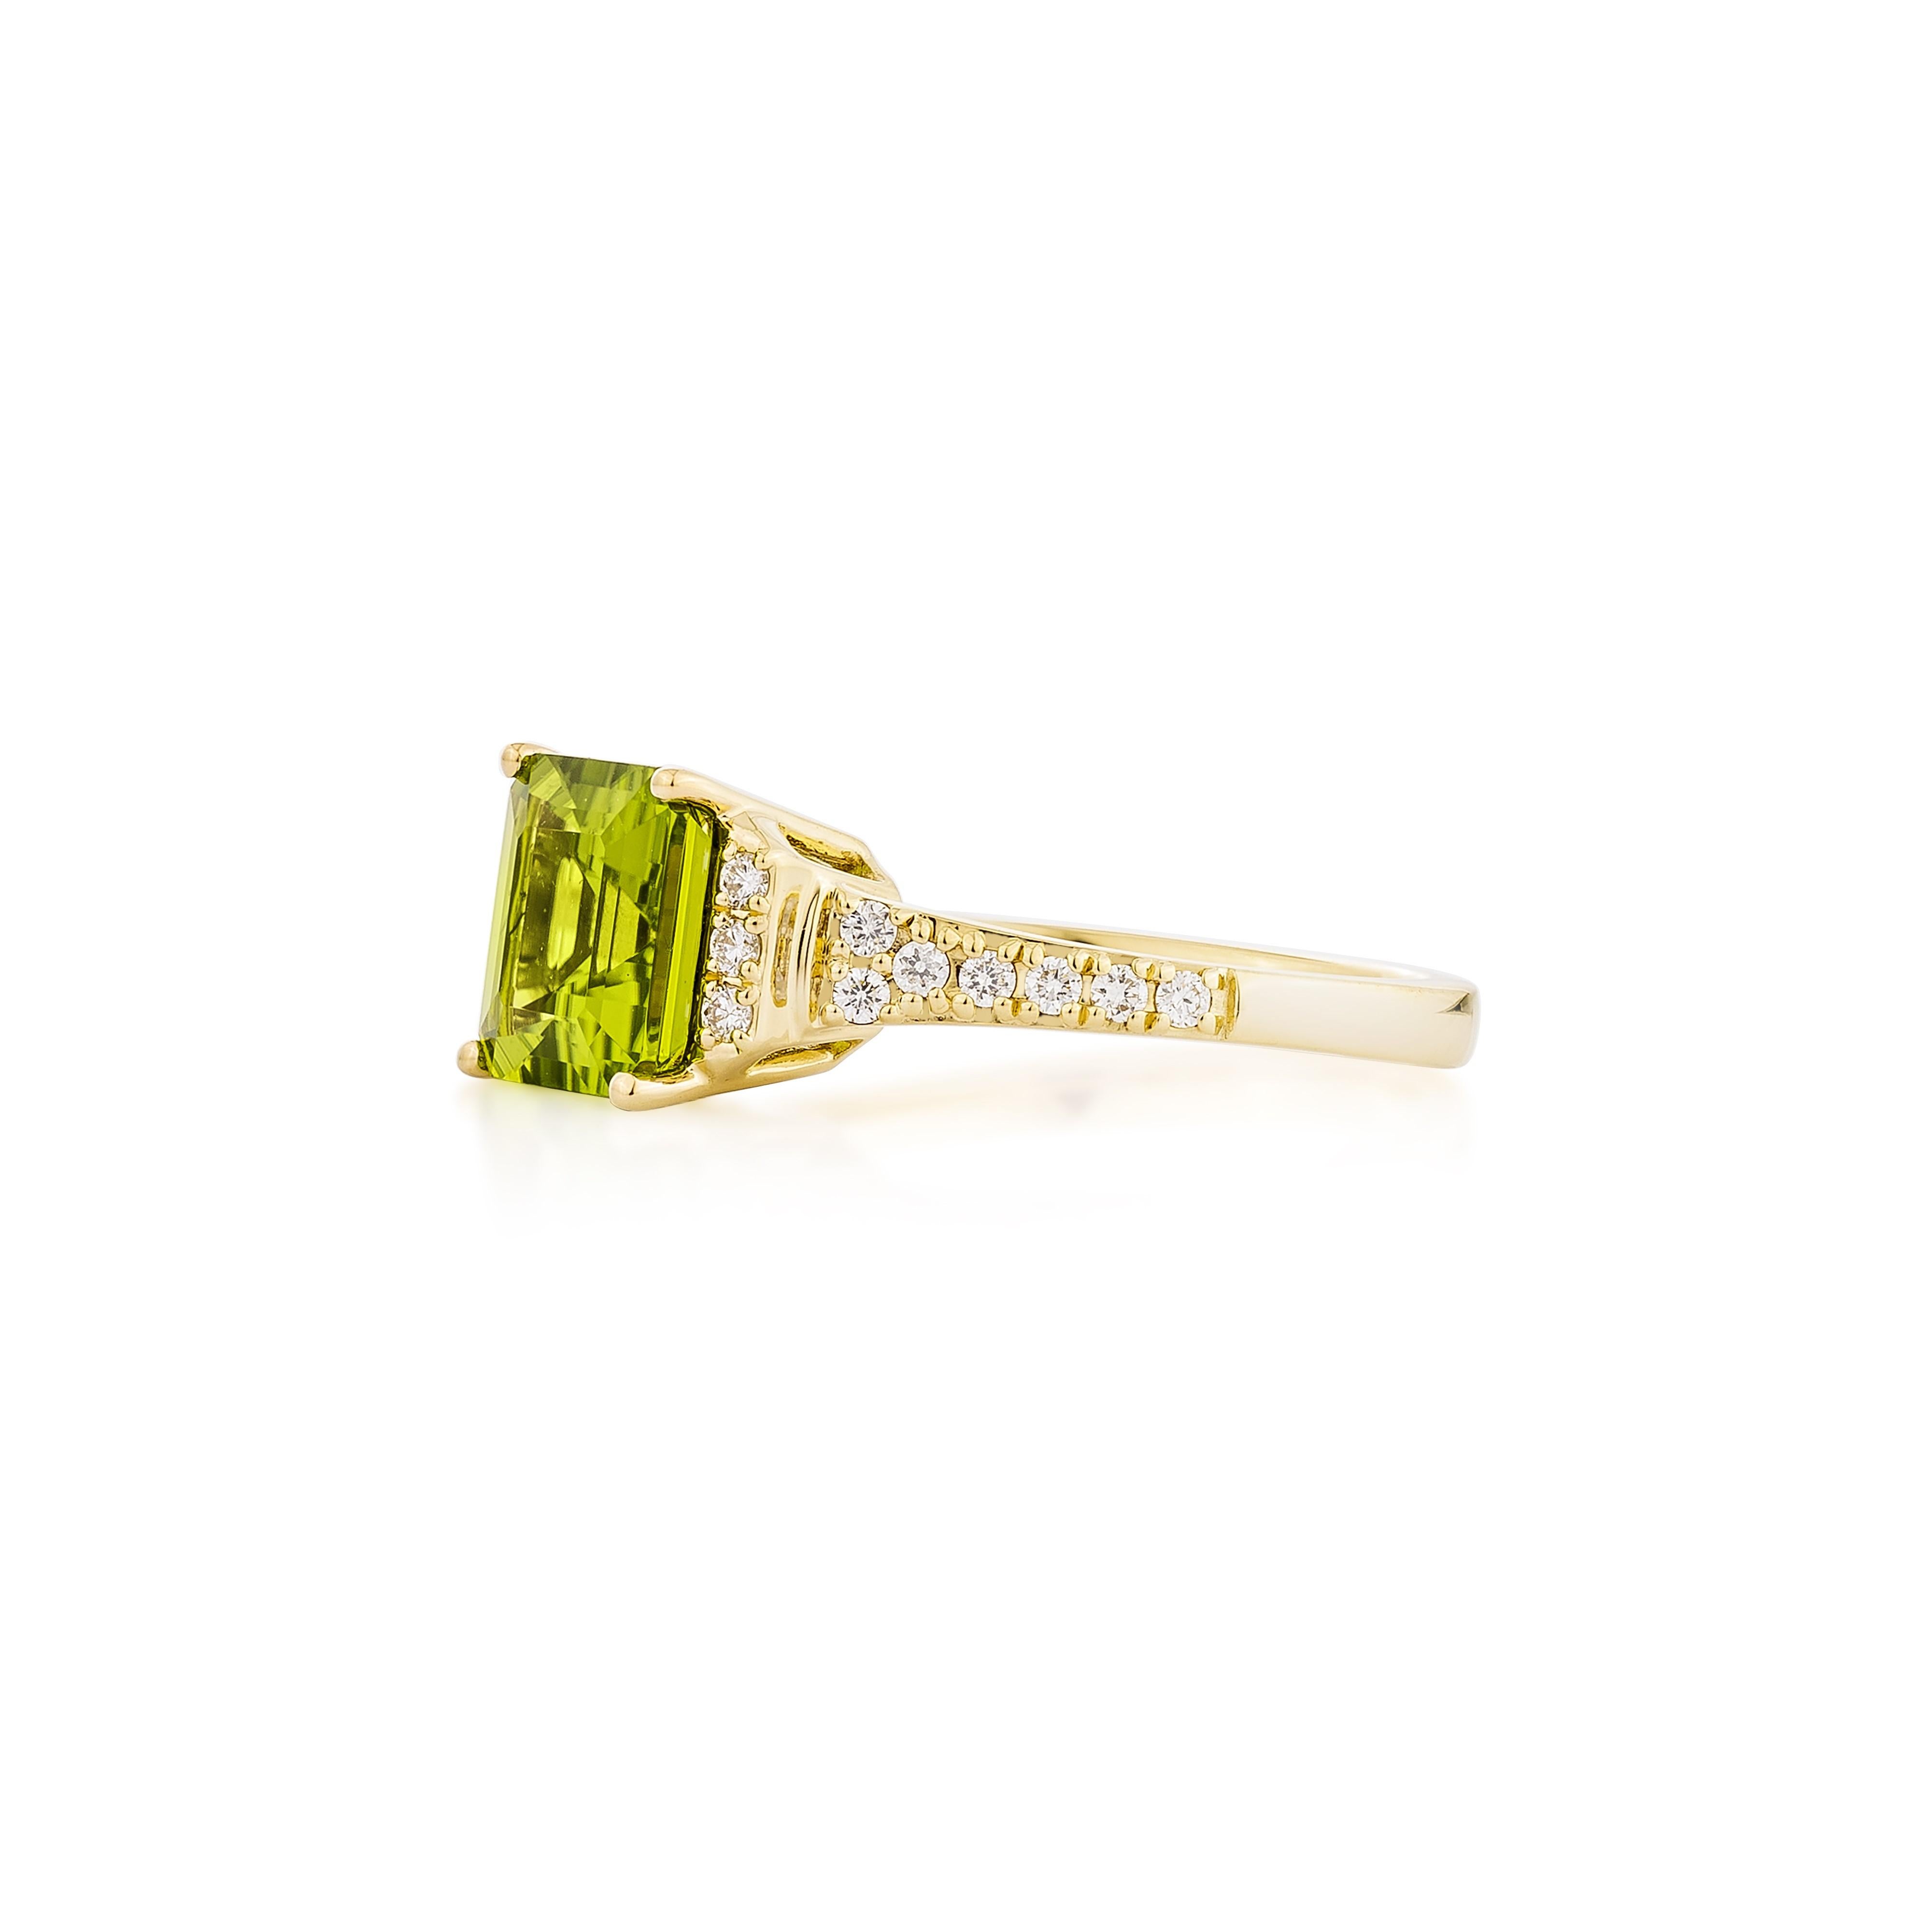 Contemporary 2.58 Carat Peridot Fancy Ring in 18 Karat Yellow Gold with White Diamond.   For Sale